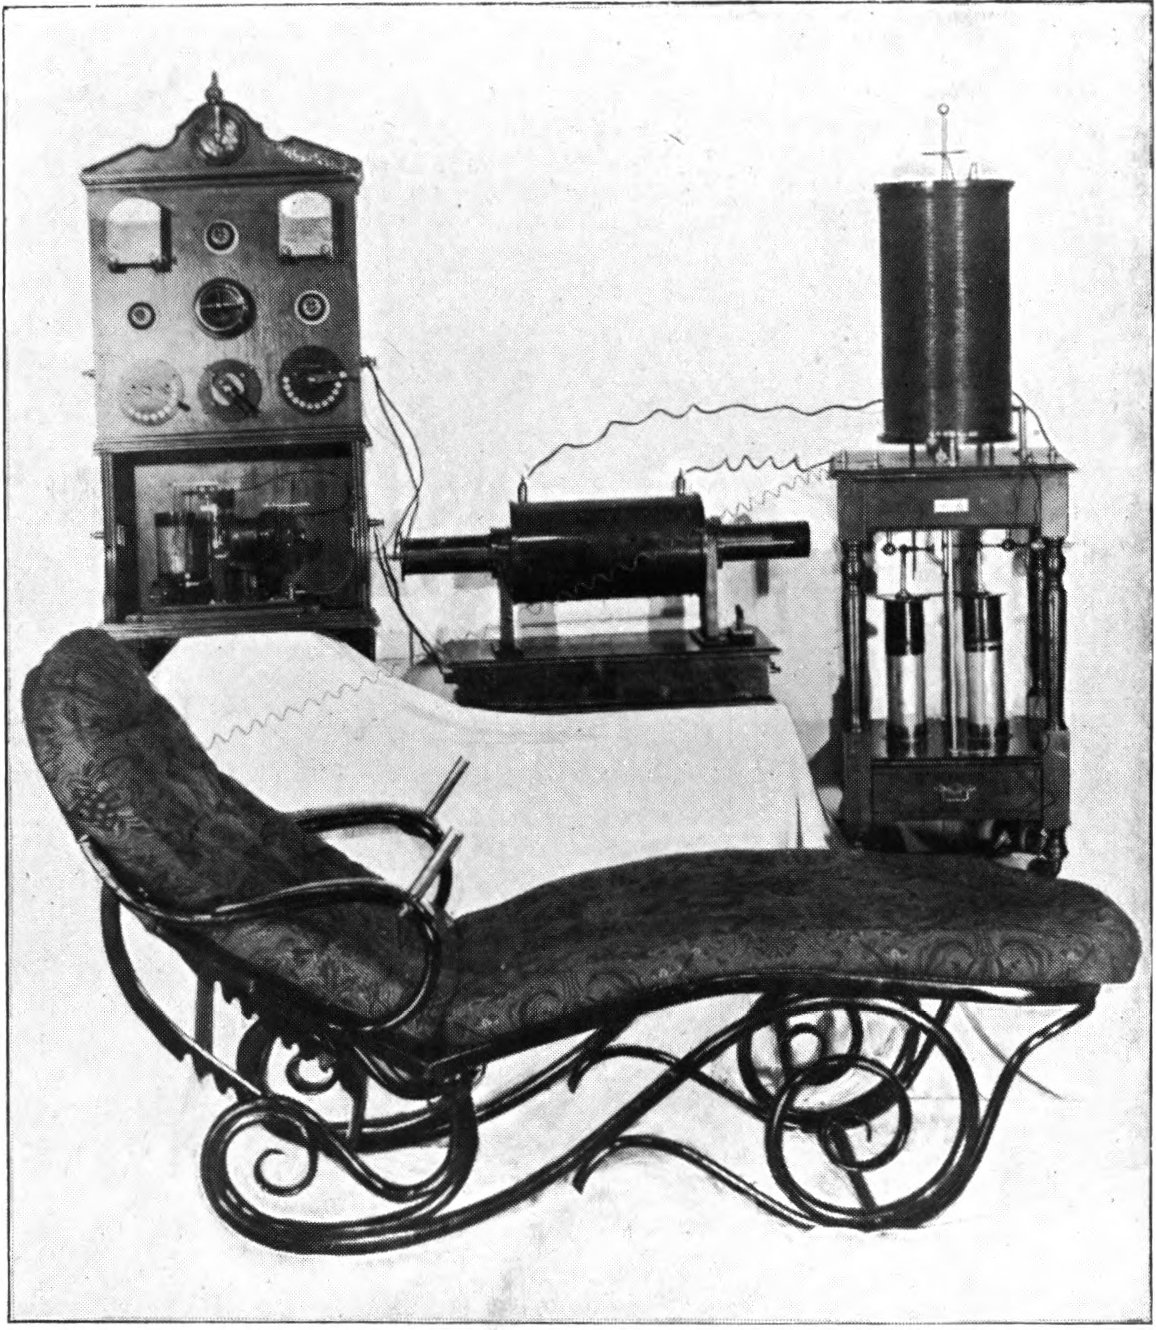 https://upload.wikimedia.org/wikipedia/commons/e/e0/Oudin_electrotherapy_outfit.jpg